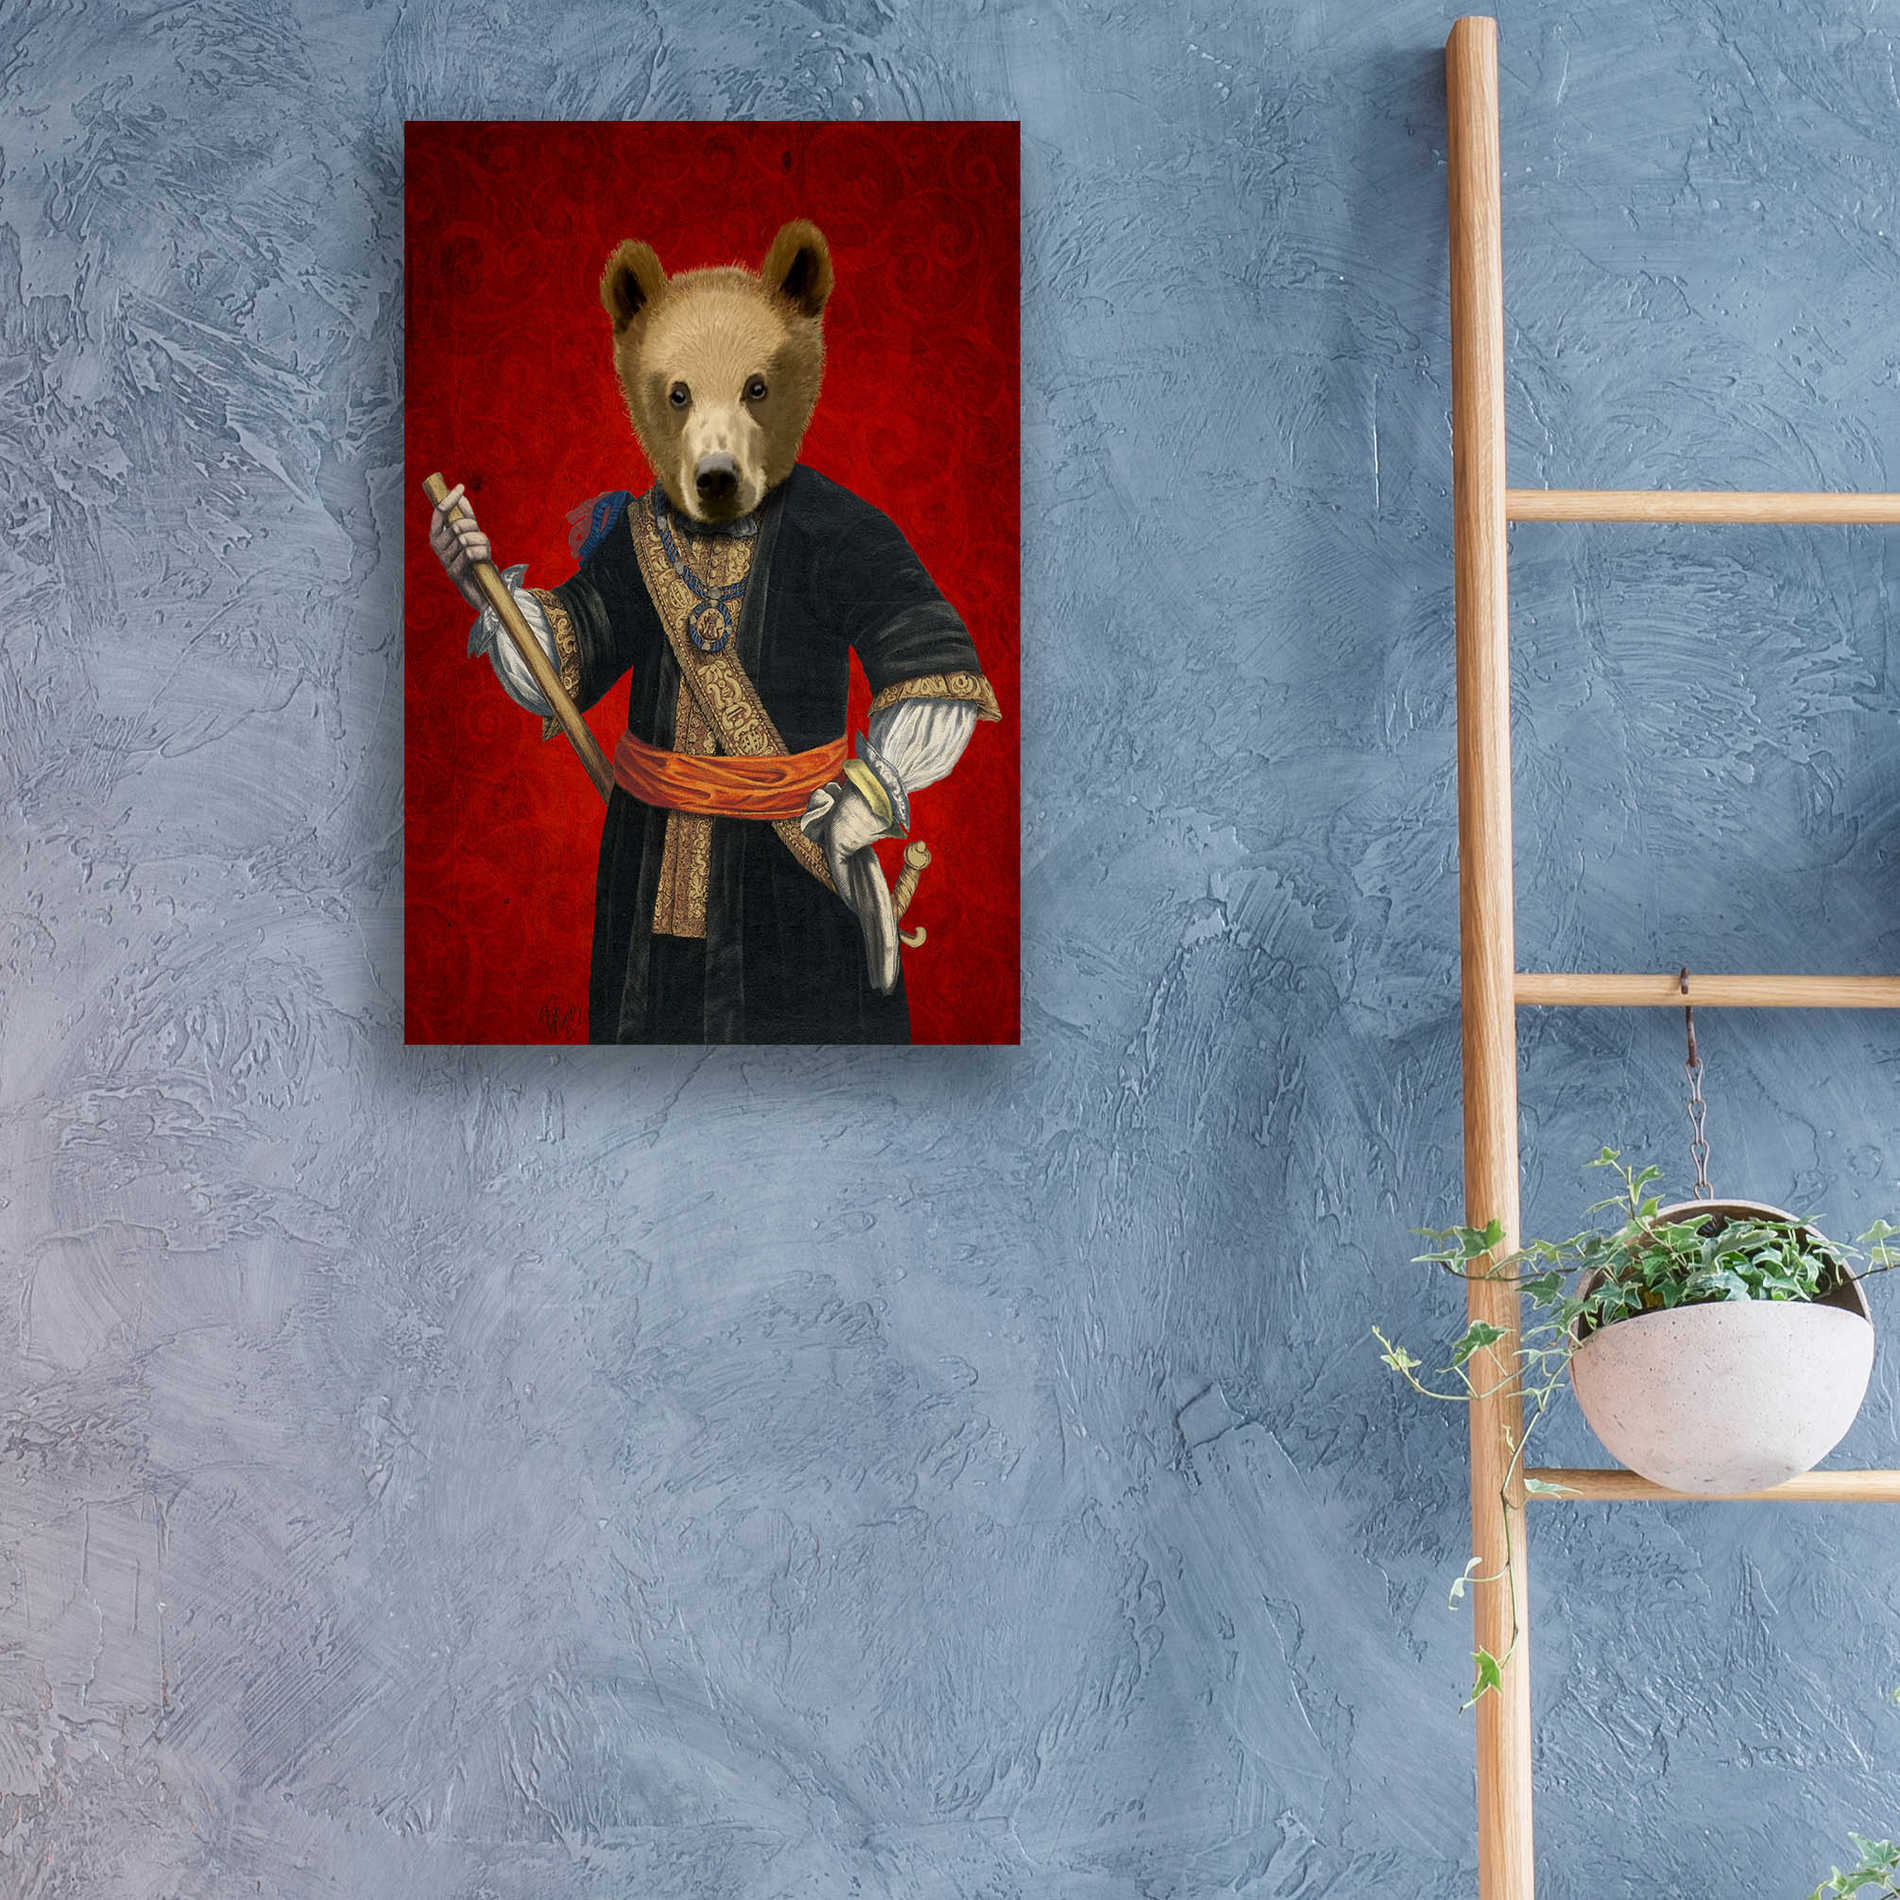 Epic Art 'Bear in Blue Robes' by Fab Funky, Acrylic Glass Wall Art,16x24